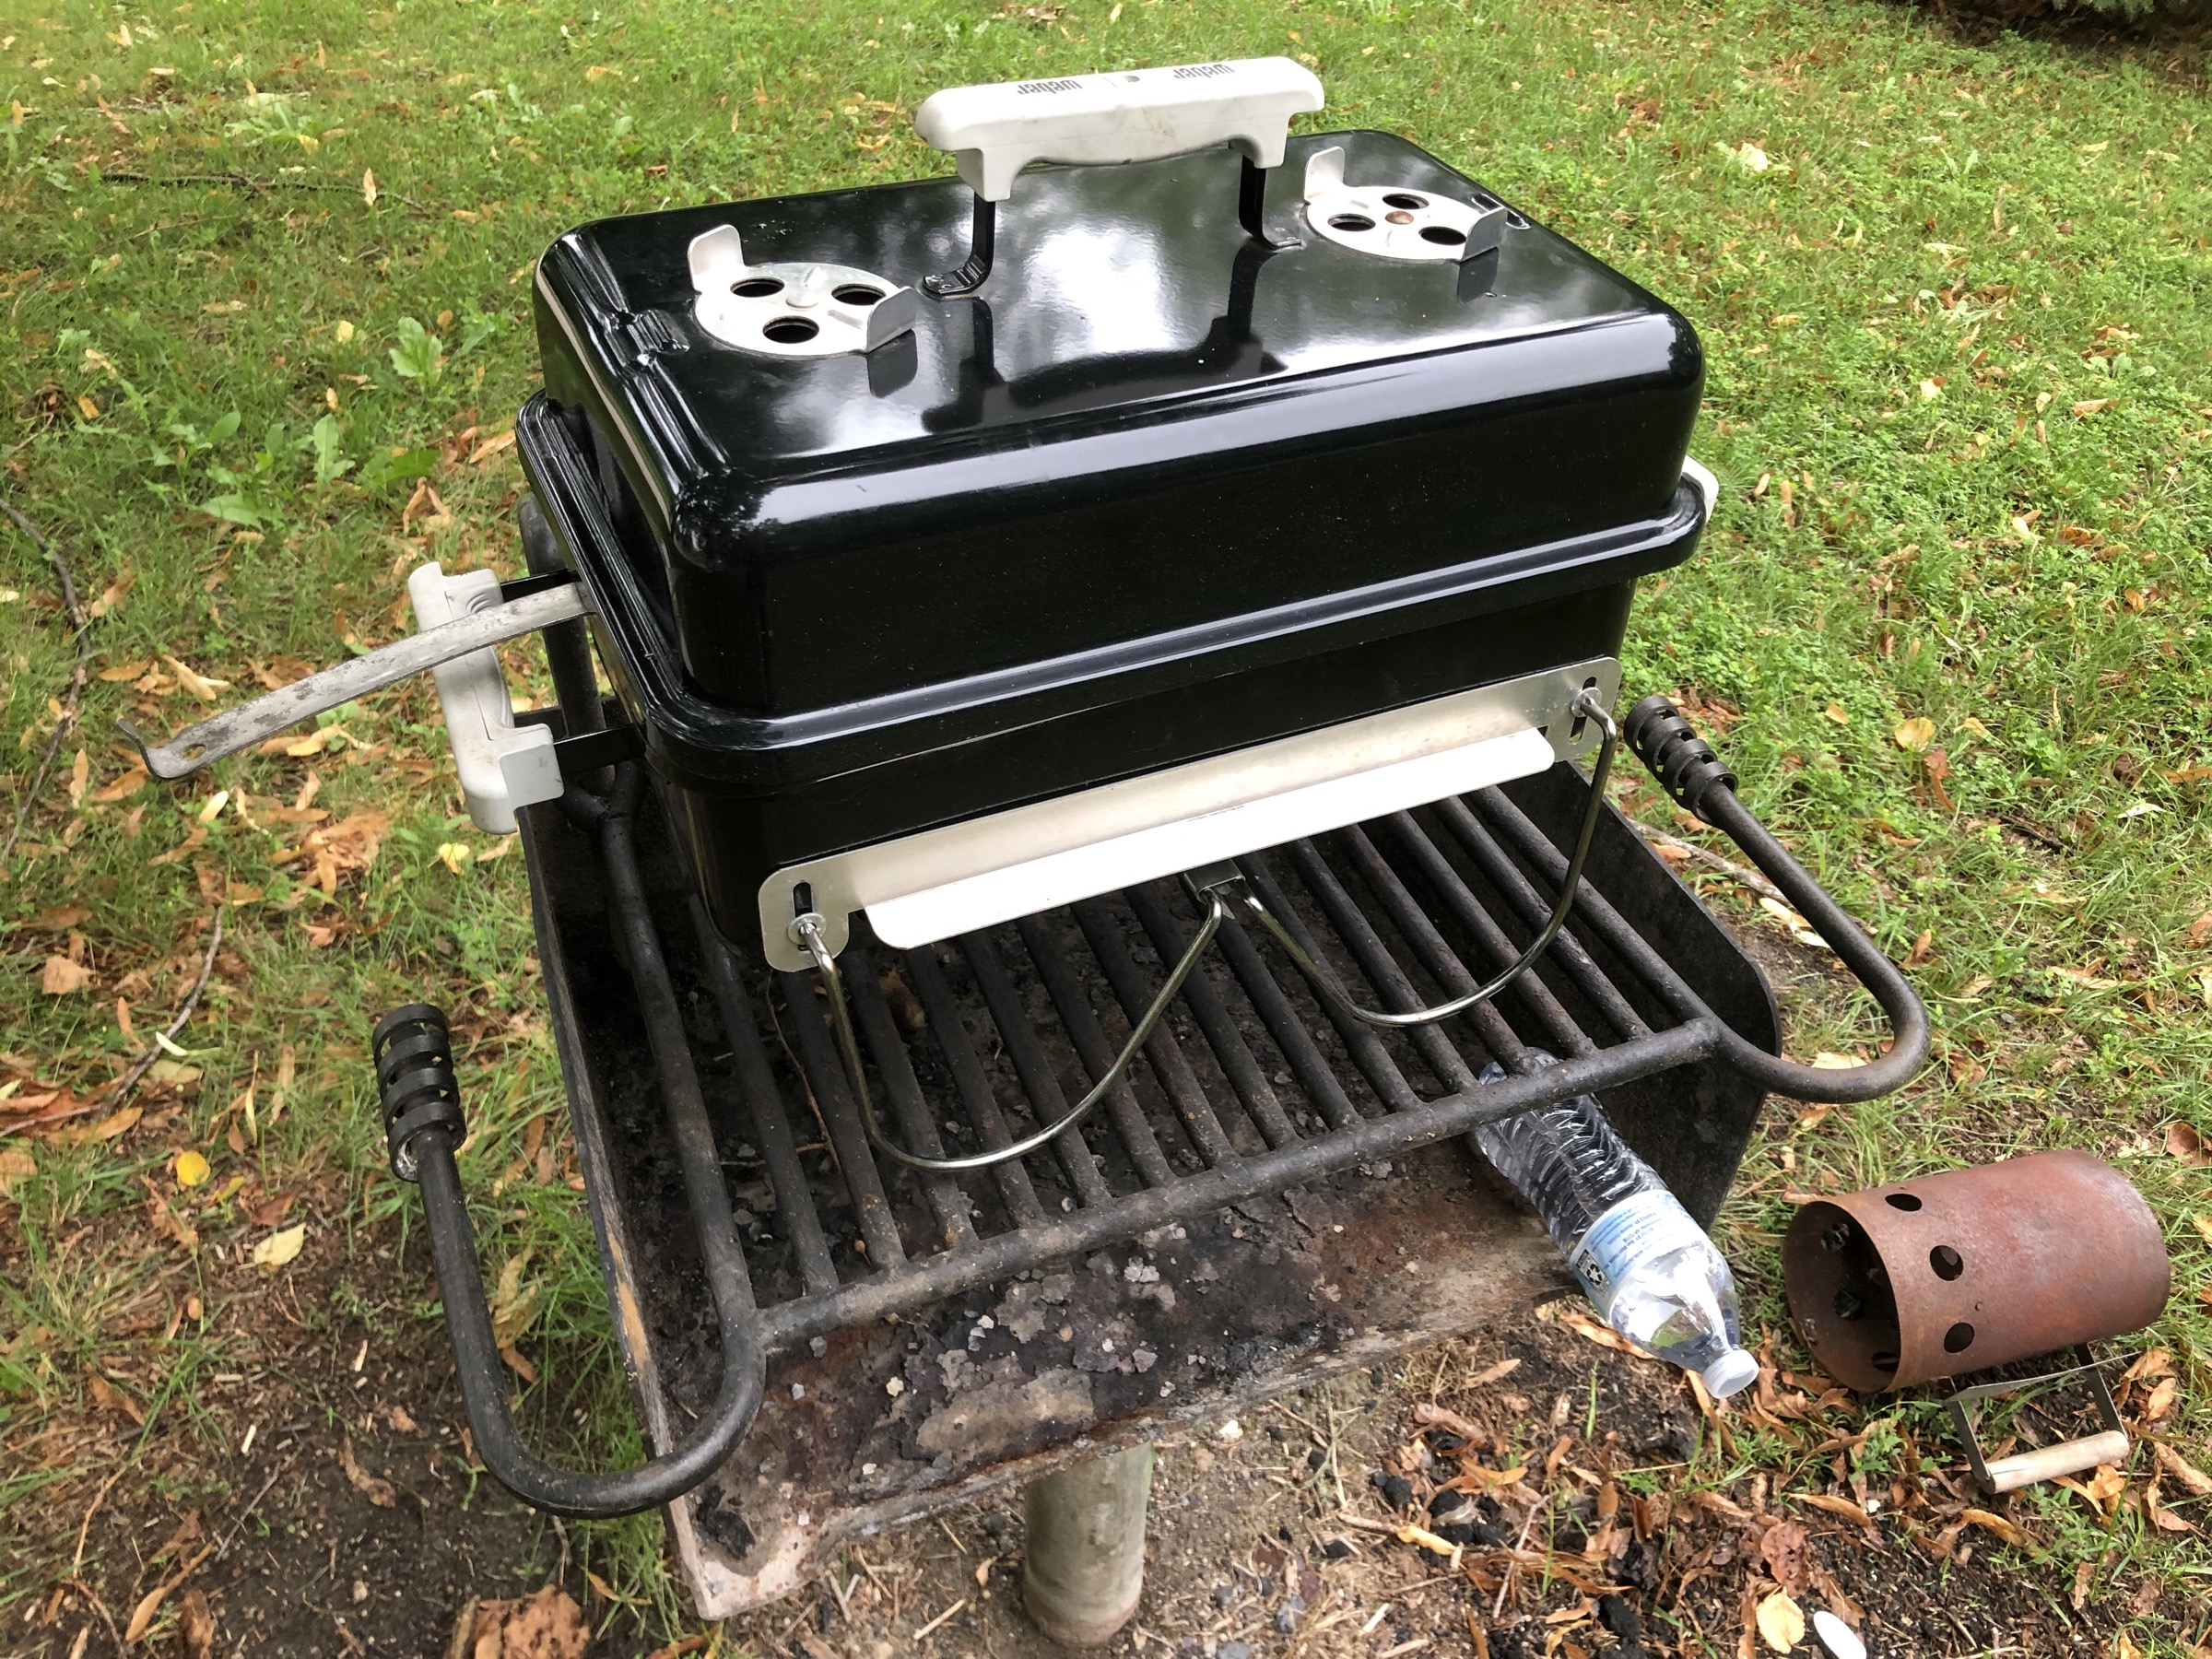 A Weber Go-Anywhere small rectangular charcoal grill sitting on top of a public grill